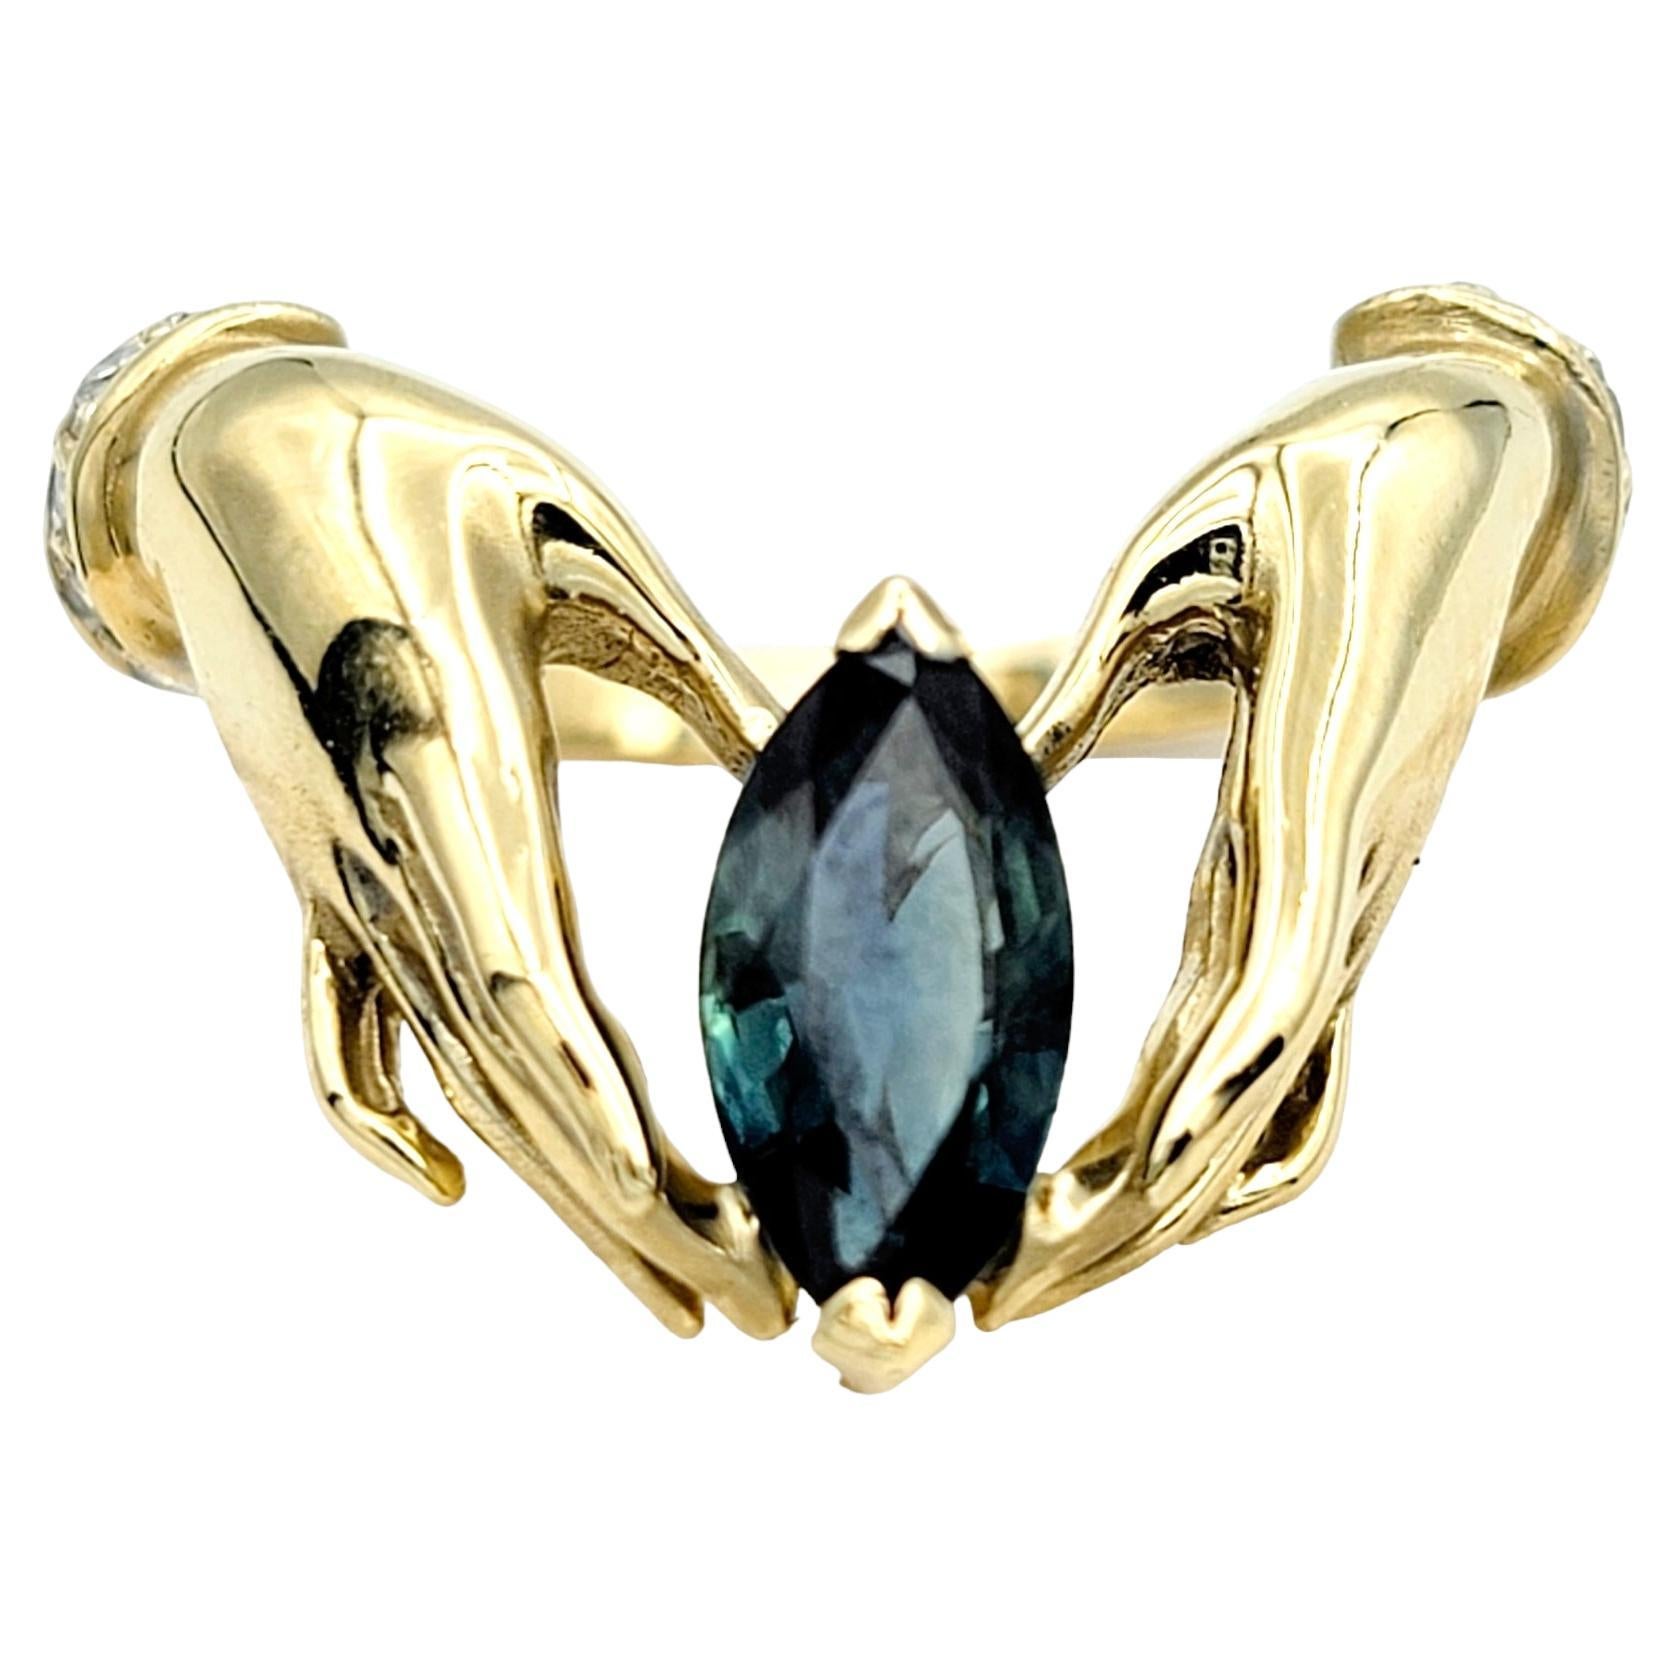 Ring size: 7.25

Capture the essence of eternal connection with our 14 karat yellow gold graceful hands ring, a timeless symbol of unity and beauty. The unique sapphire and diamond design makes a lovely statement piece that will not go unnoticed.